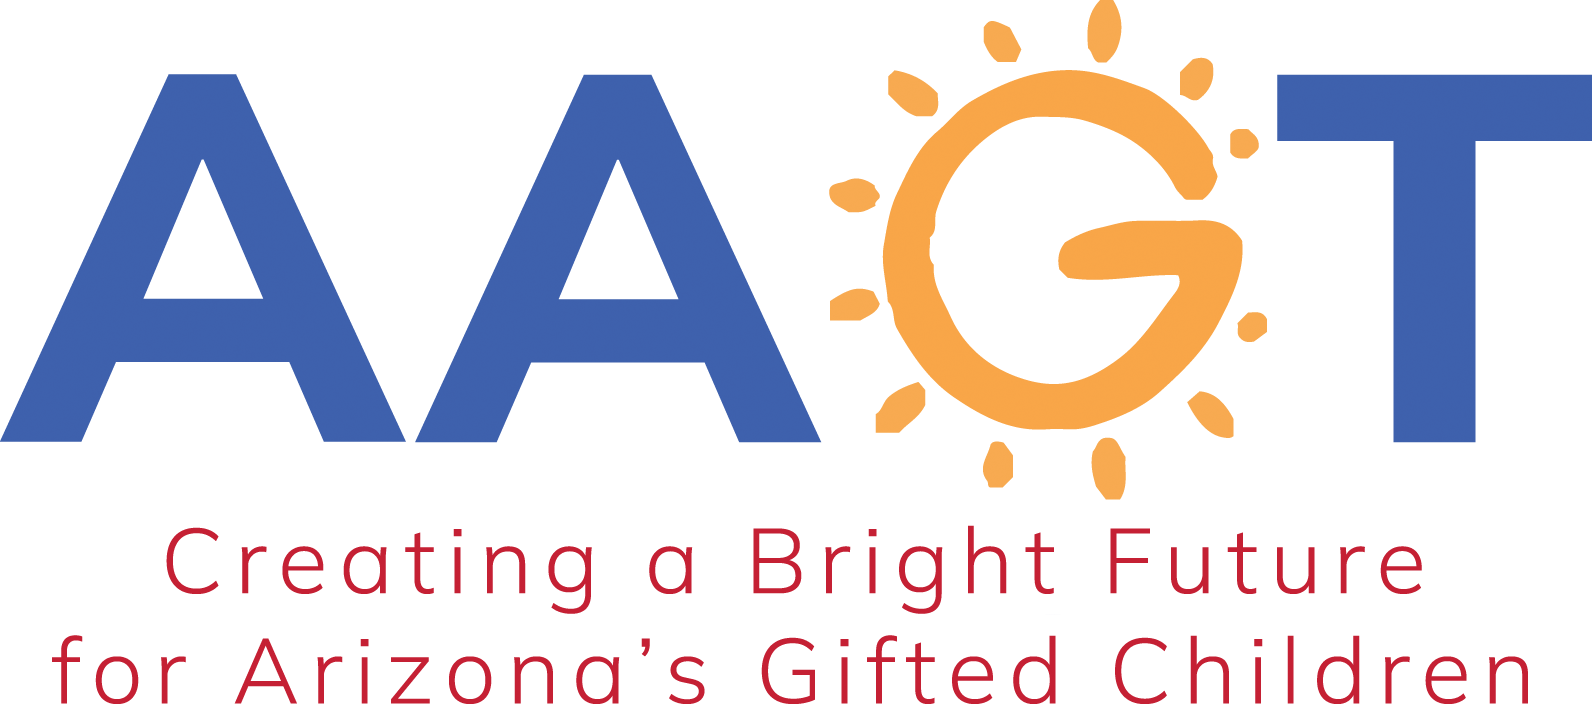 Arizona Association for Gifted and Talented